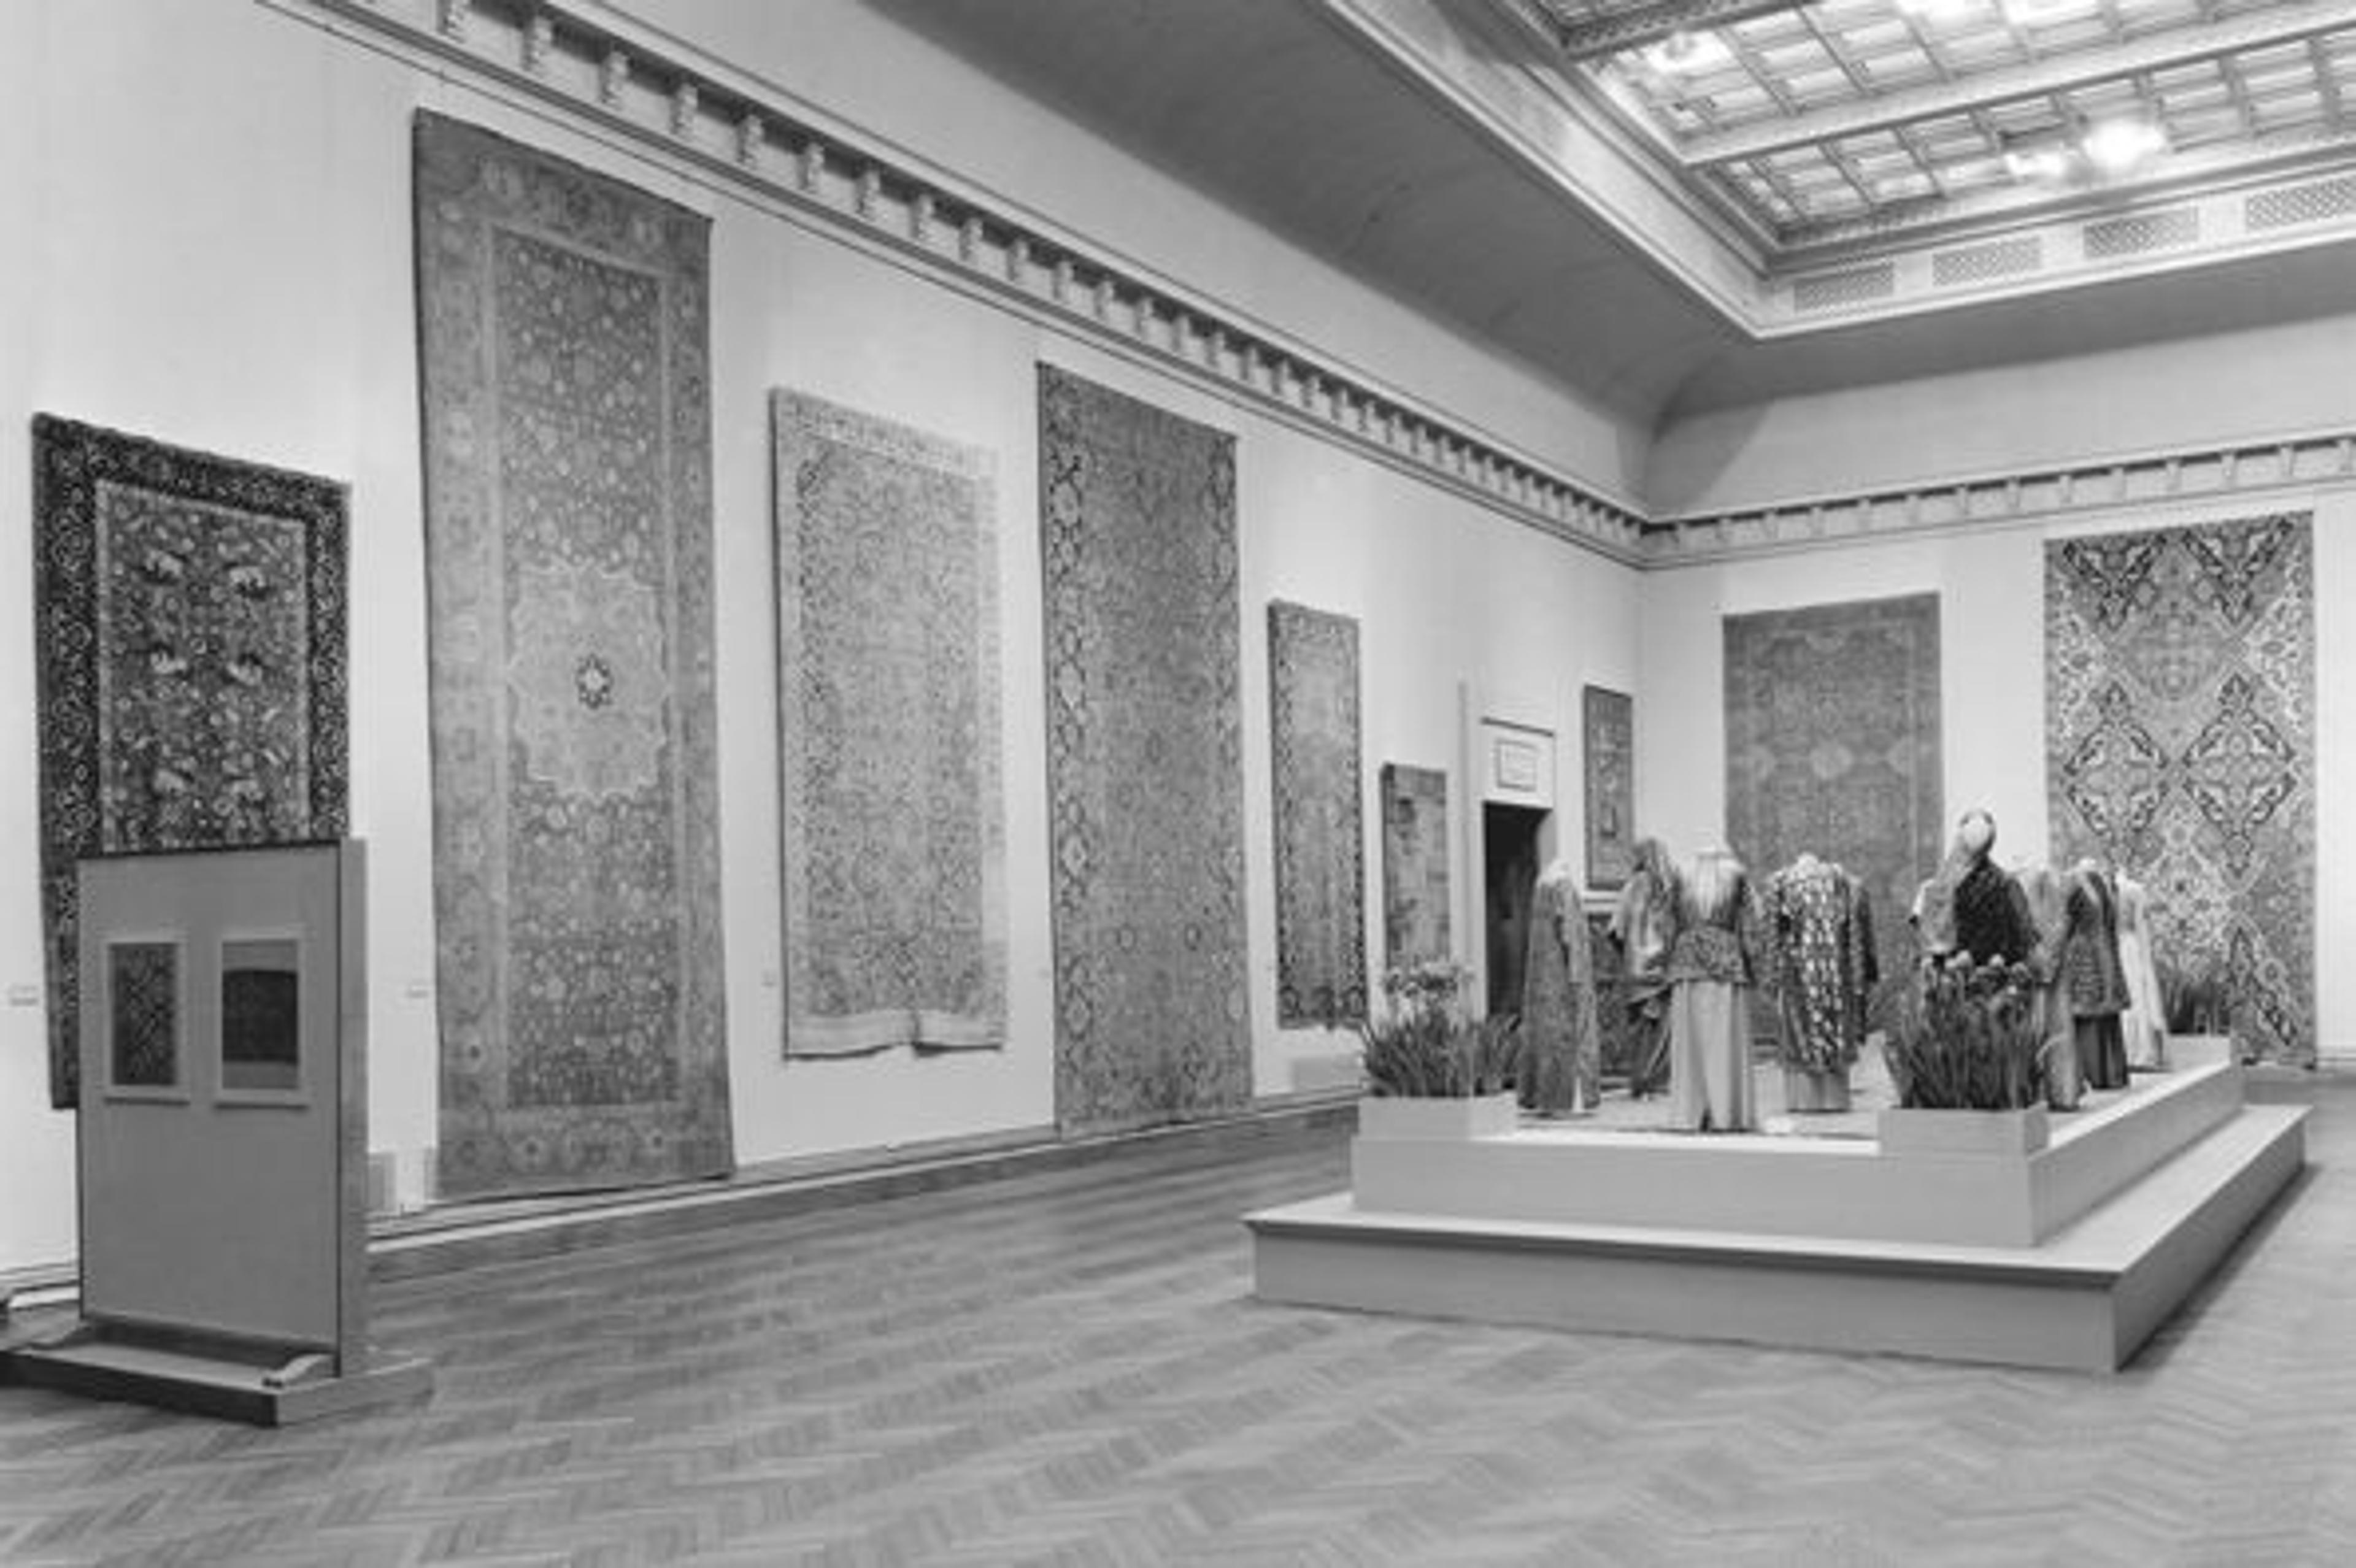 "Oriental Rugs and Textiles" Exhibition, 1935